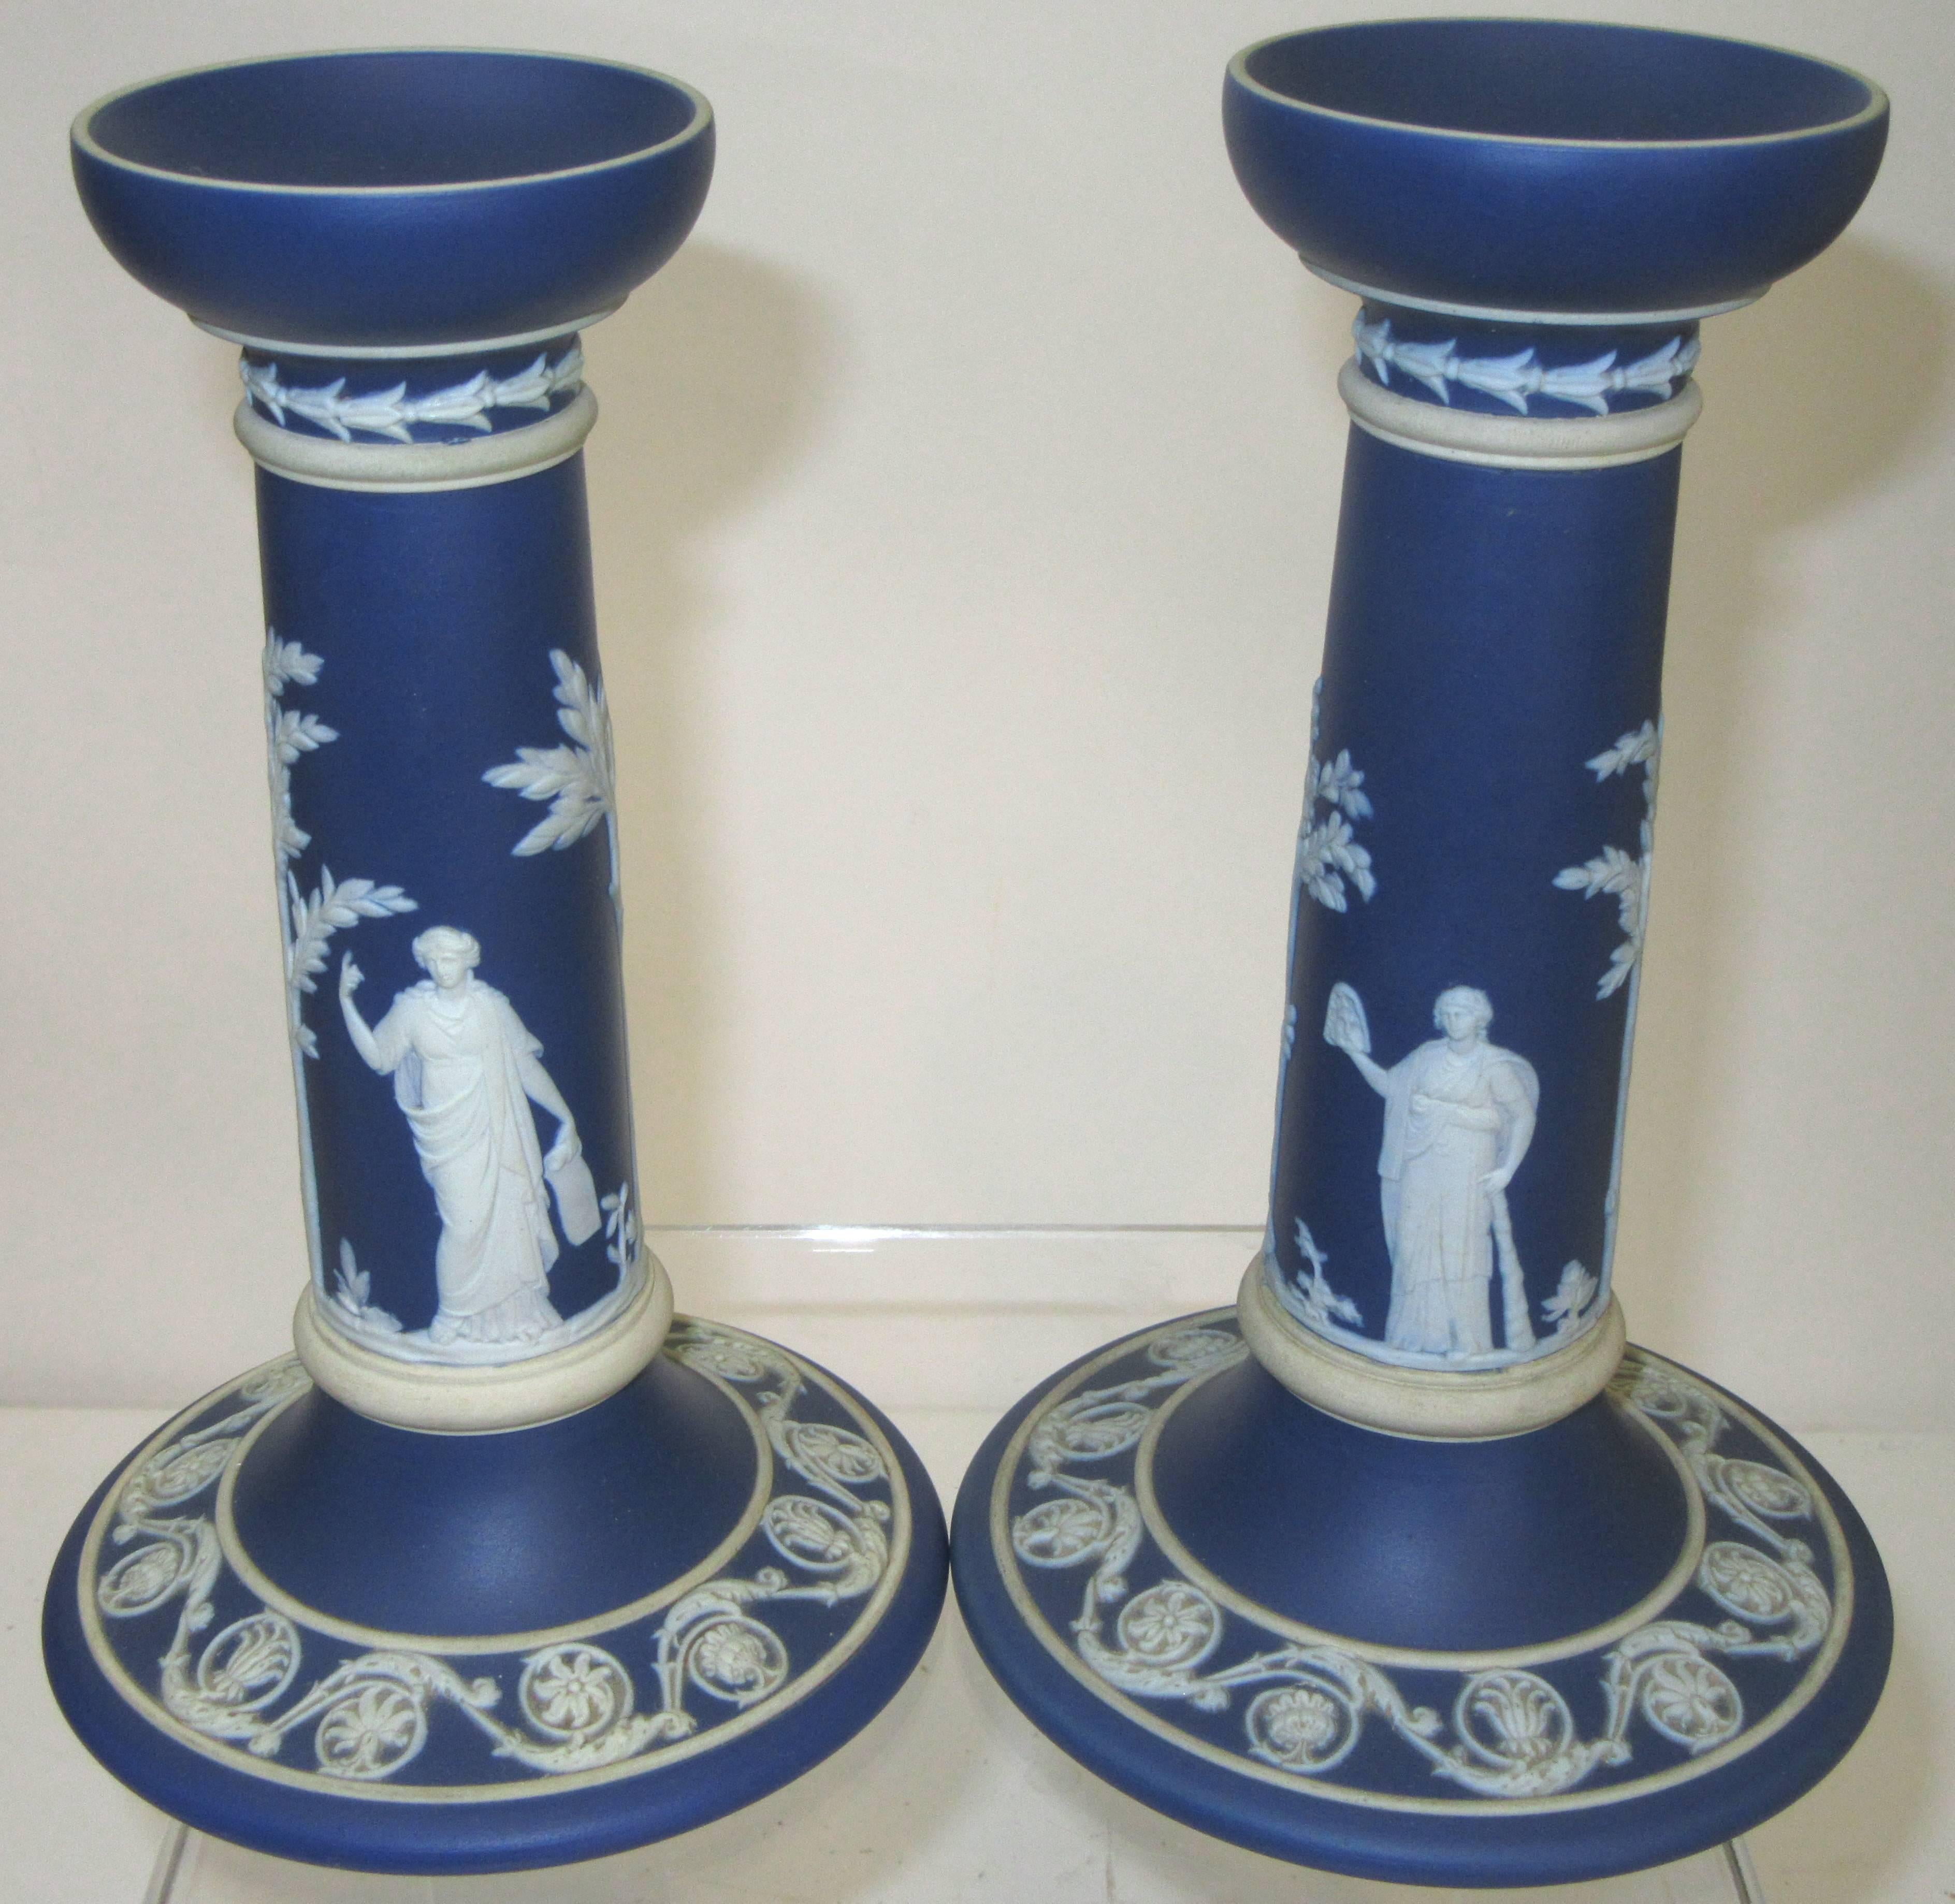 A complimentary pair of dark blue and white, neoclassic design jasperware candleholders. Stamped Wedgwood.